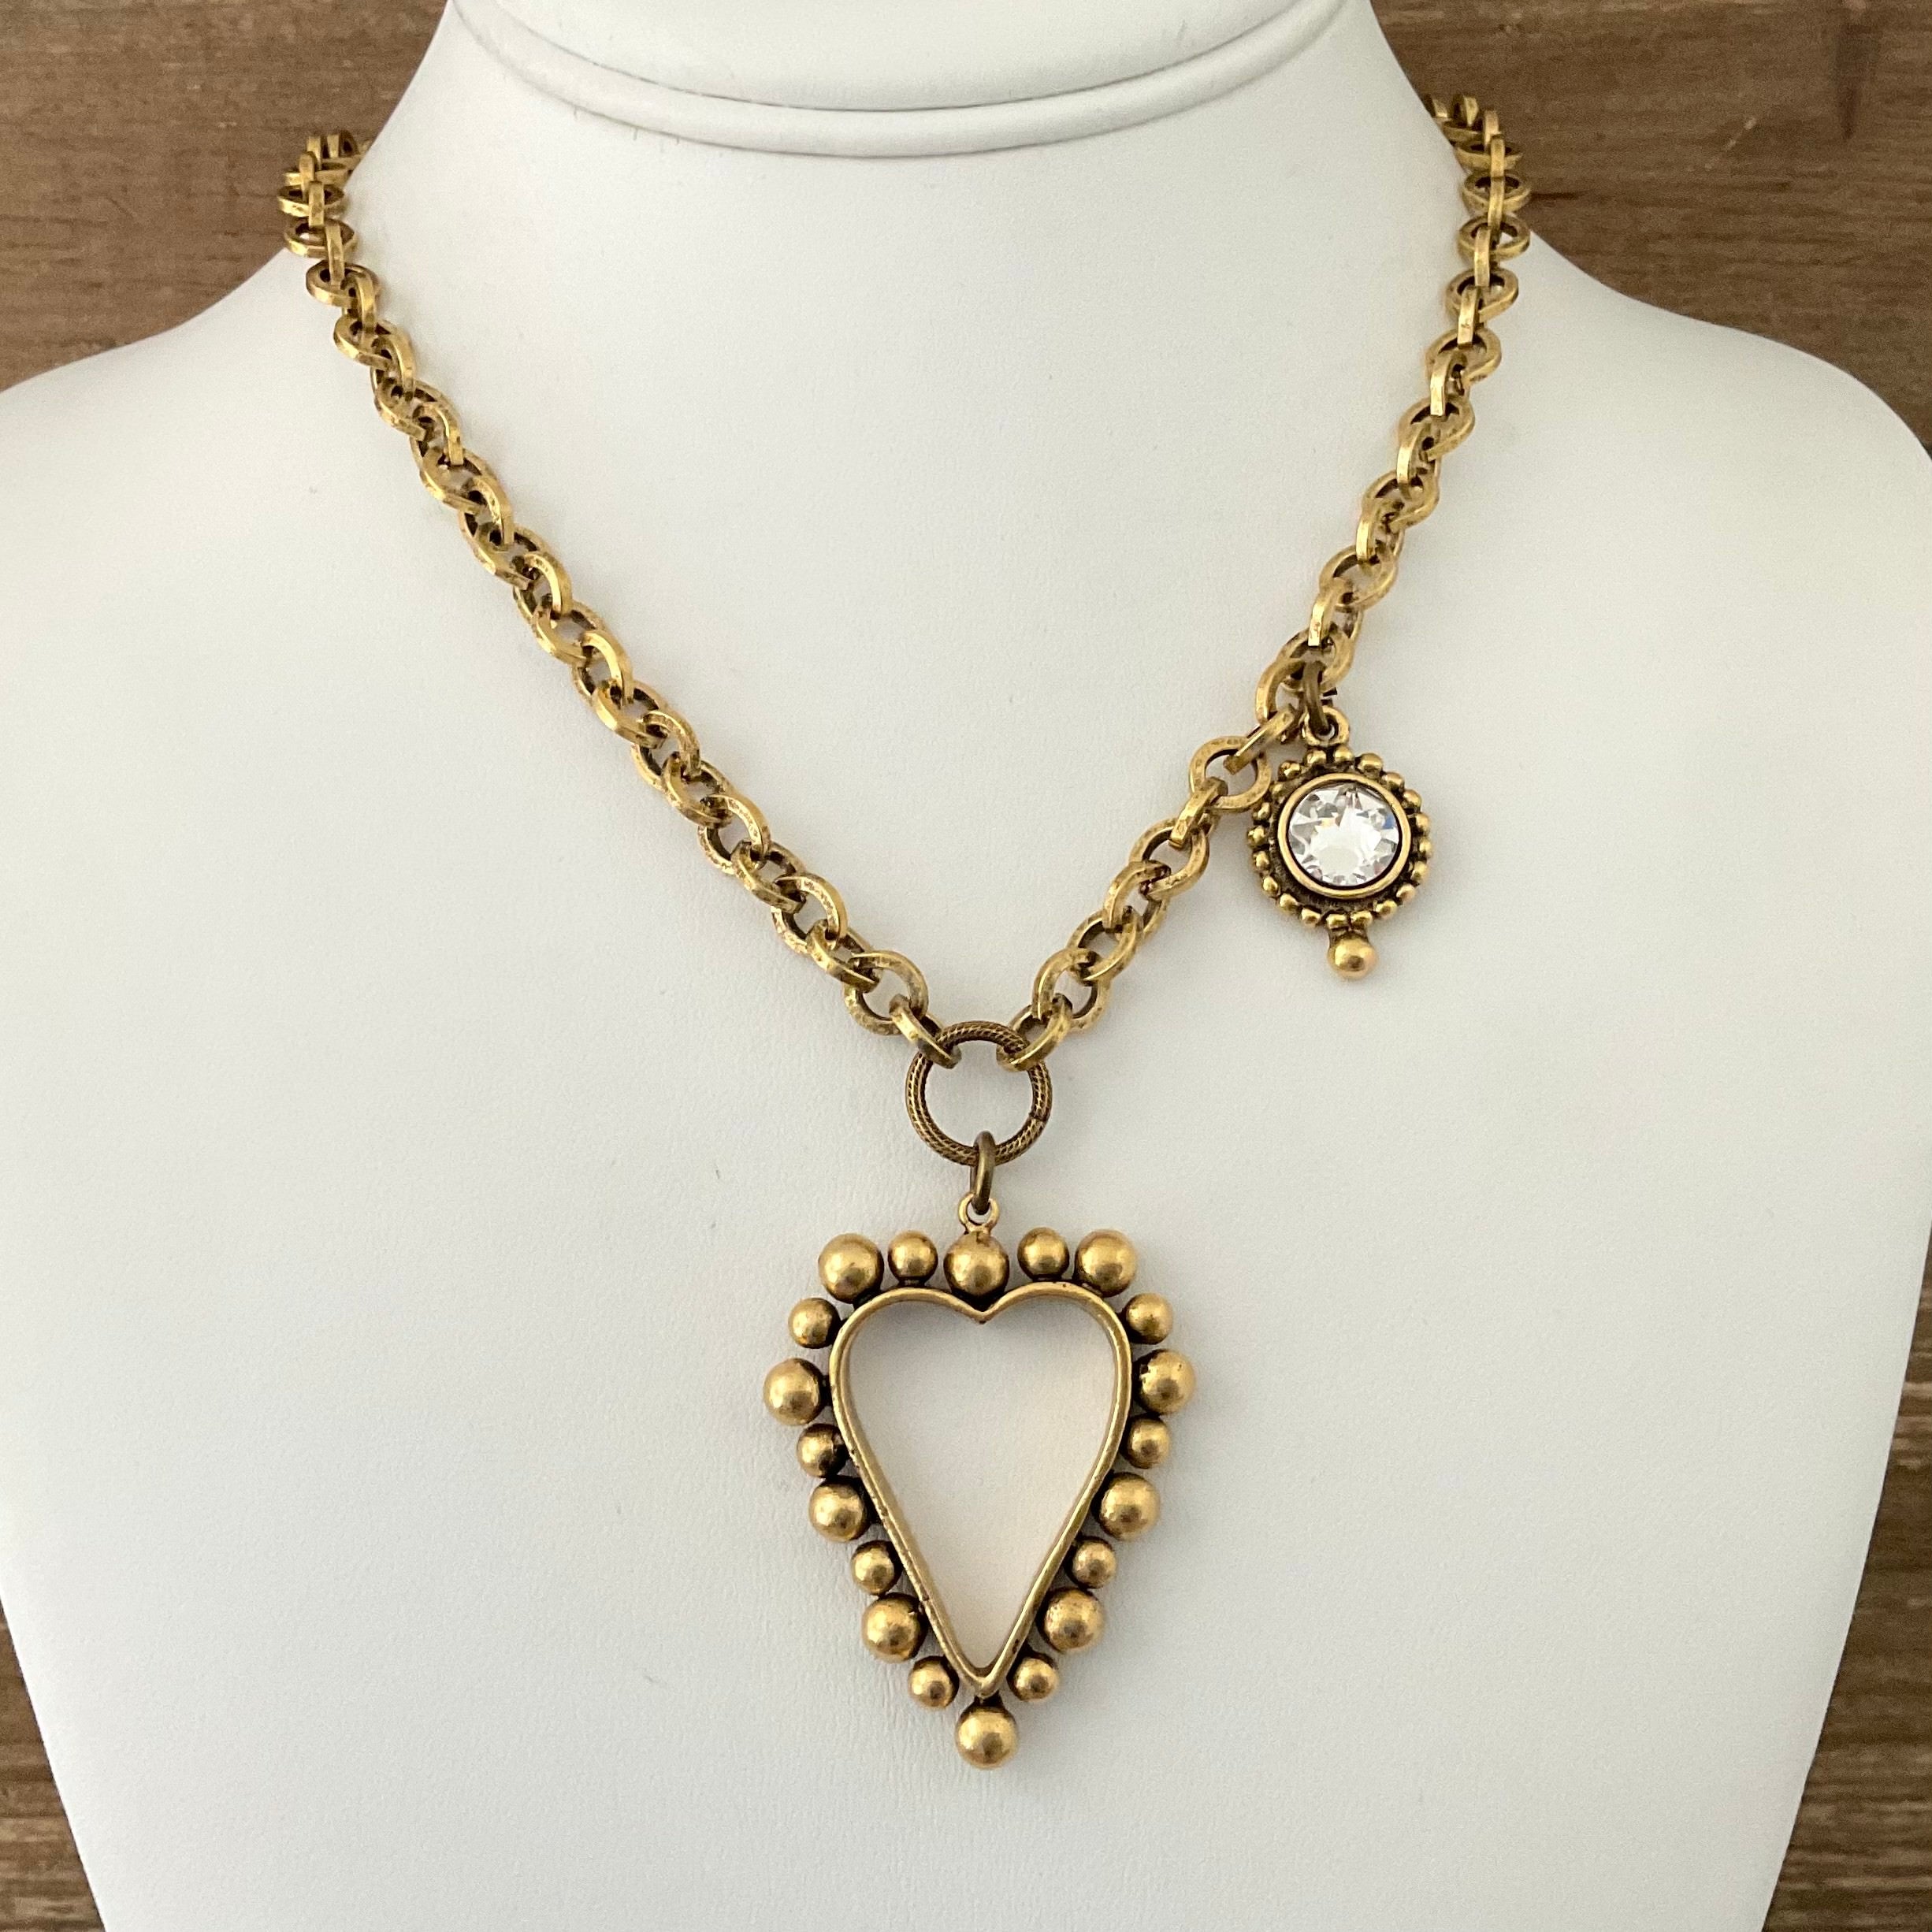 Vintage Gold Plated Chain with Gold Heart Pendant & Crystal 18"